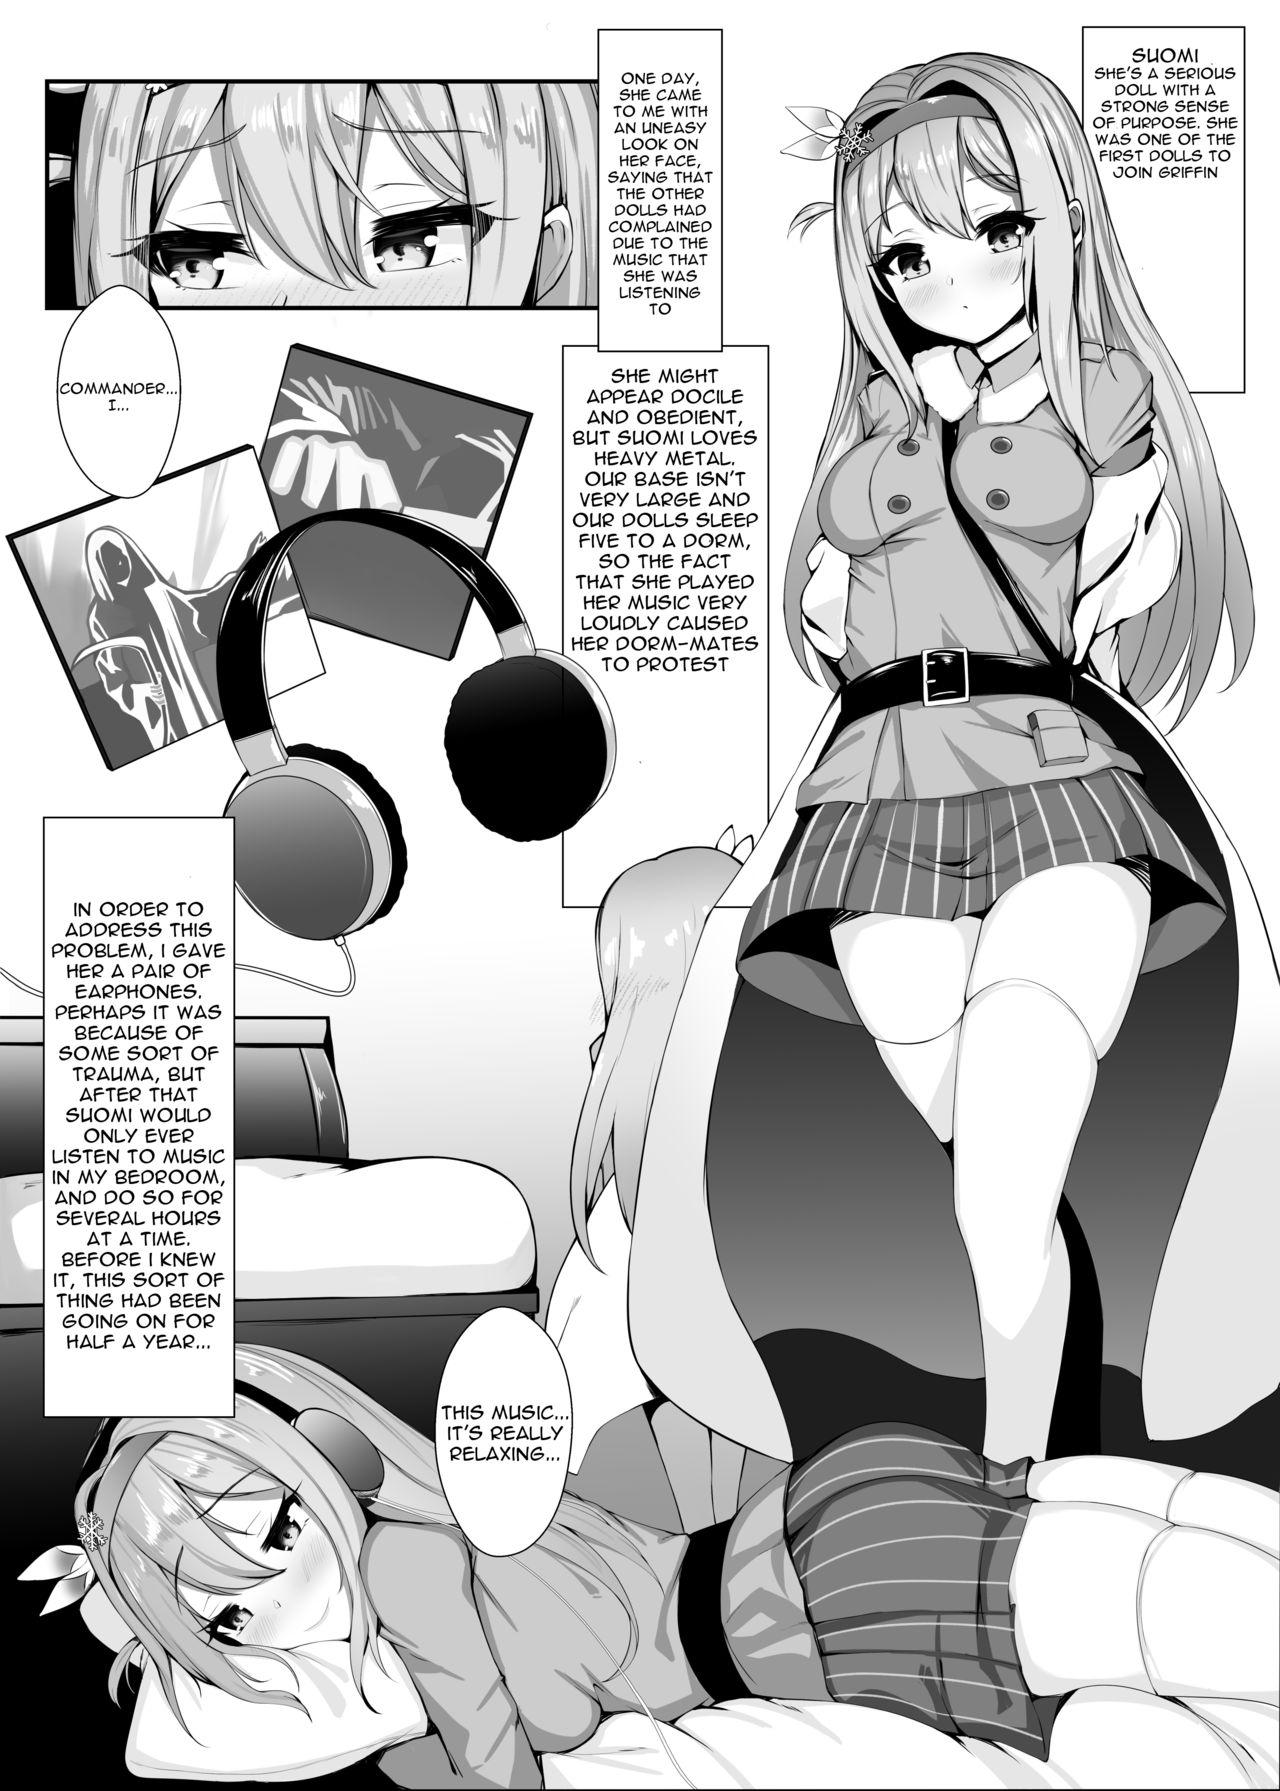 Wet Suomi - Mission of Love - Girls frontline Shaven - Page 4